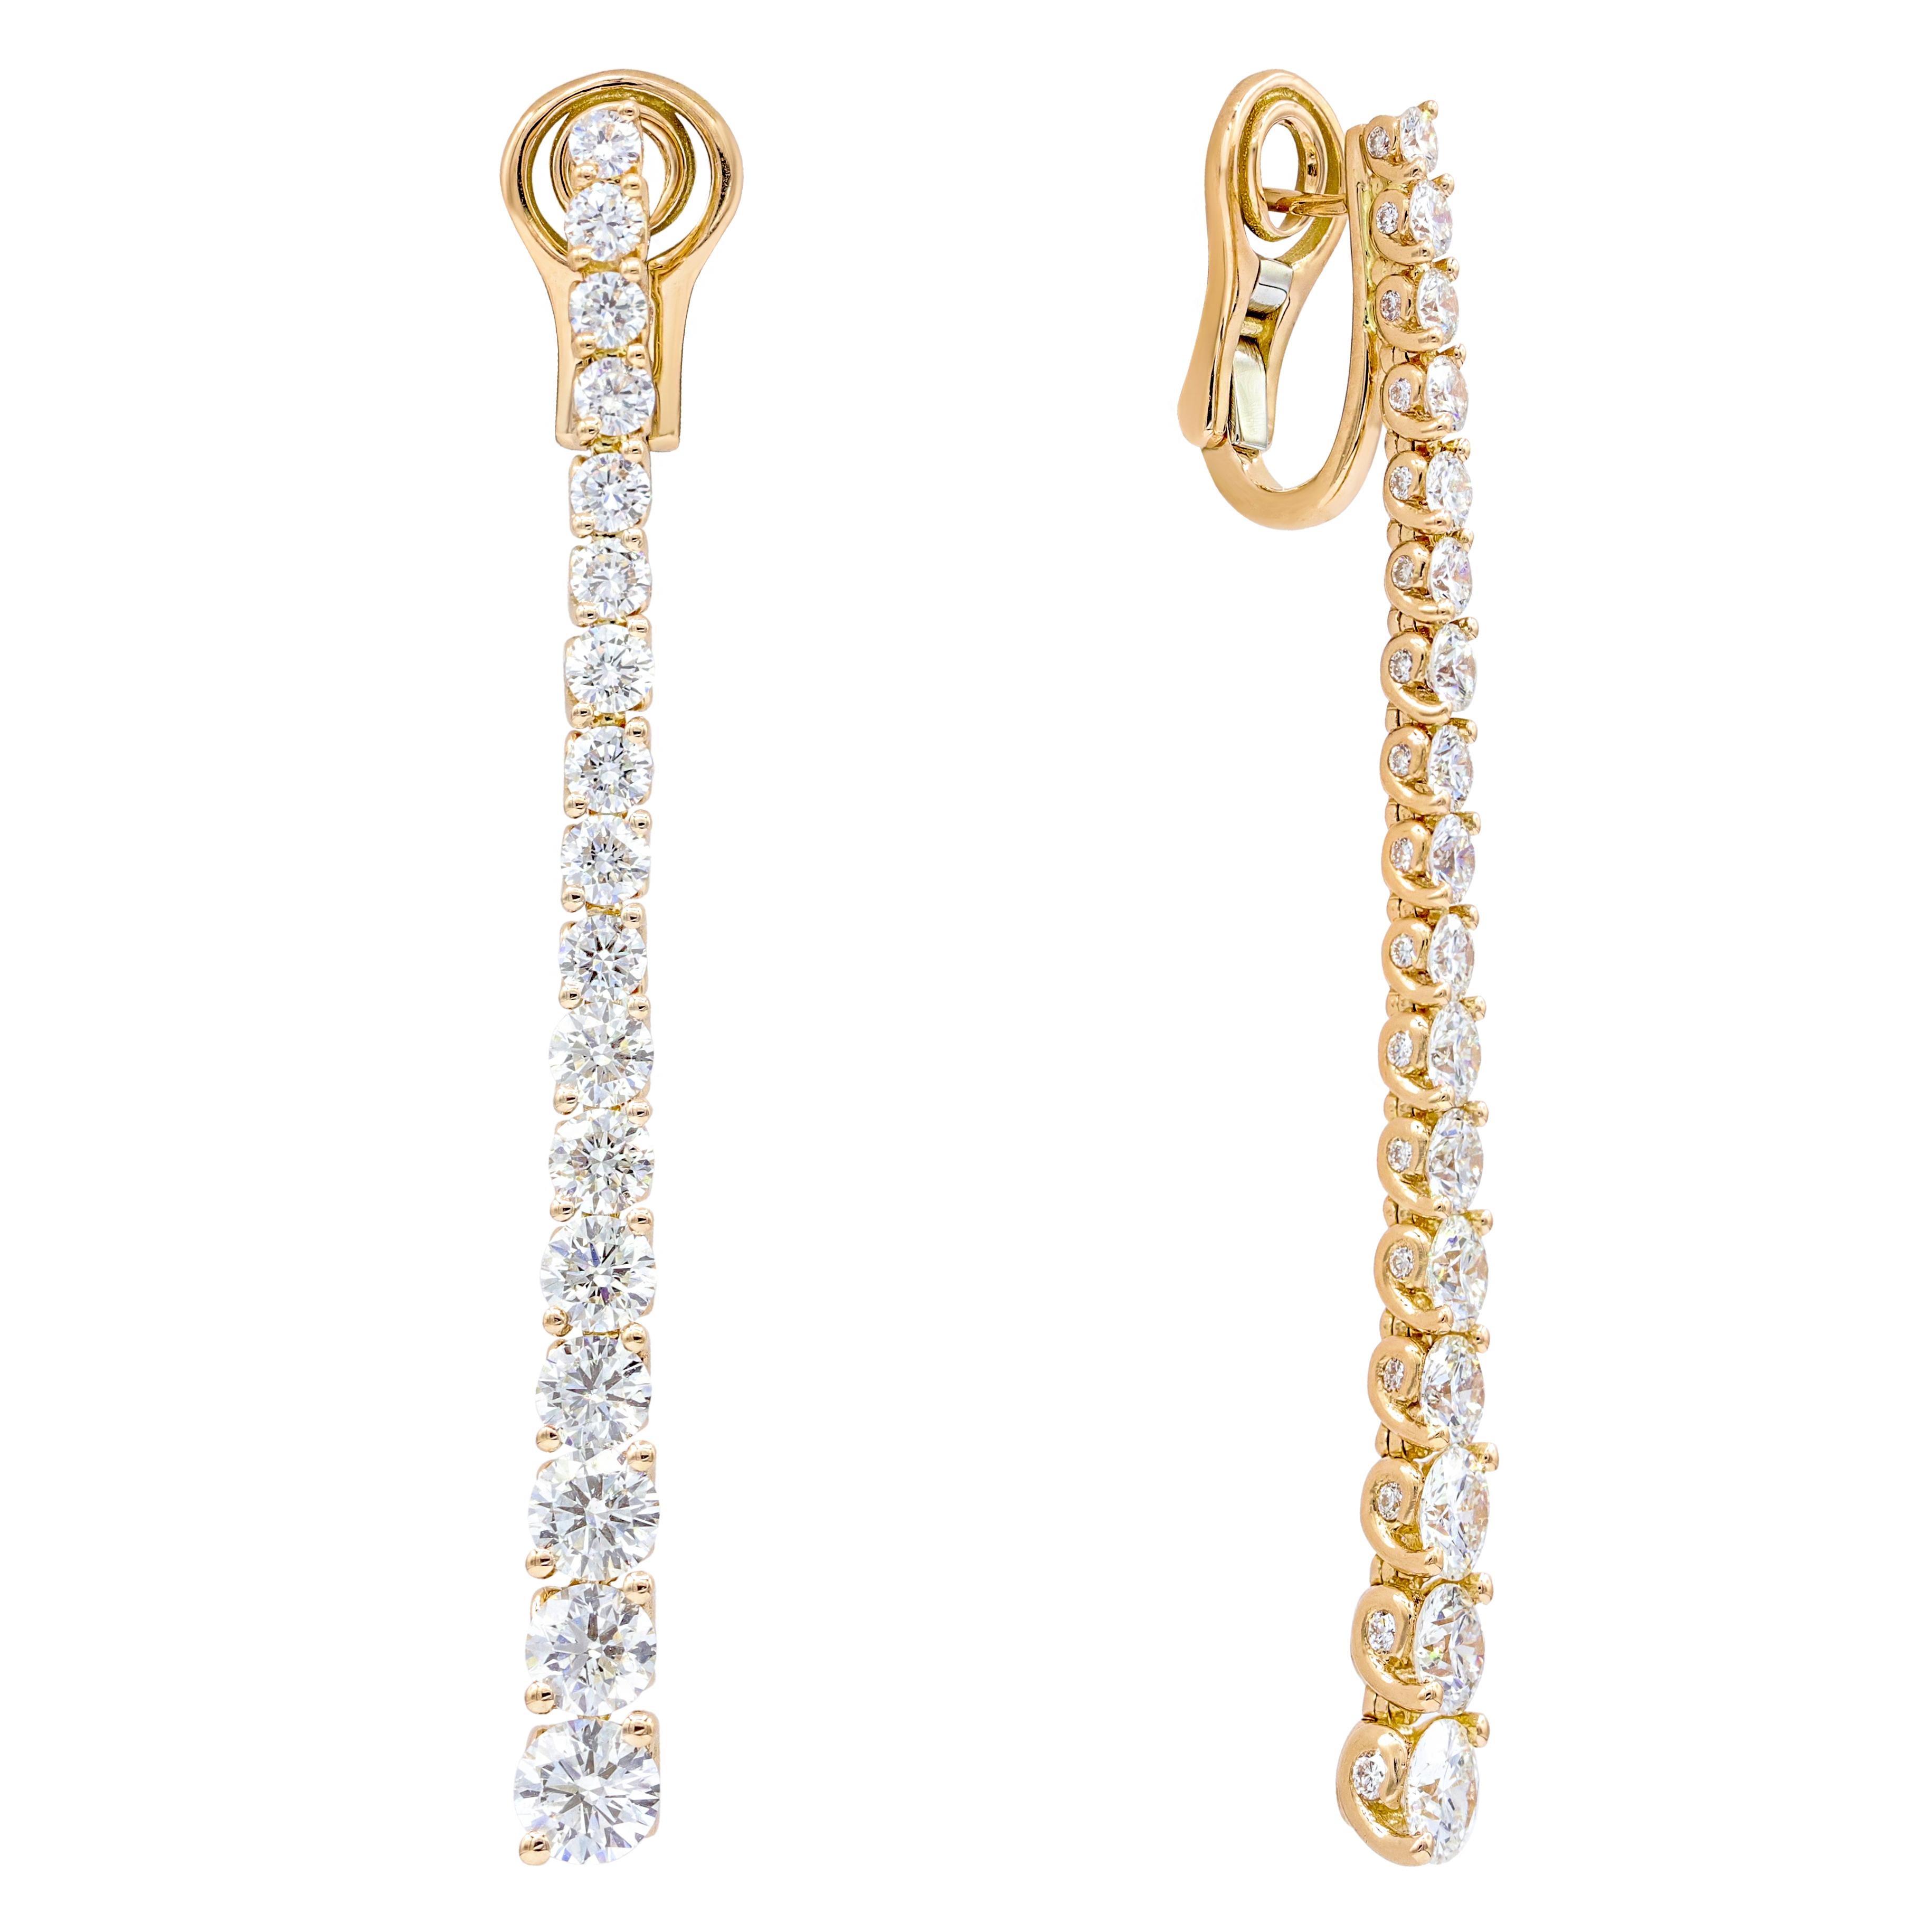 18K rose gold diamond hanging earrings, features 5.30ct of round diamonds.